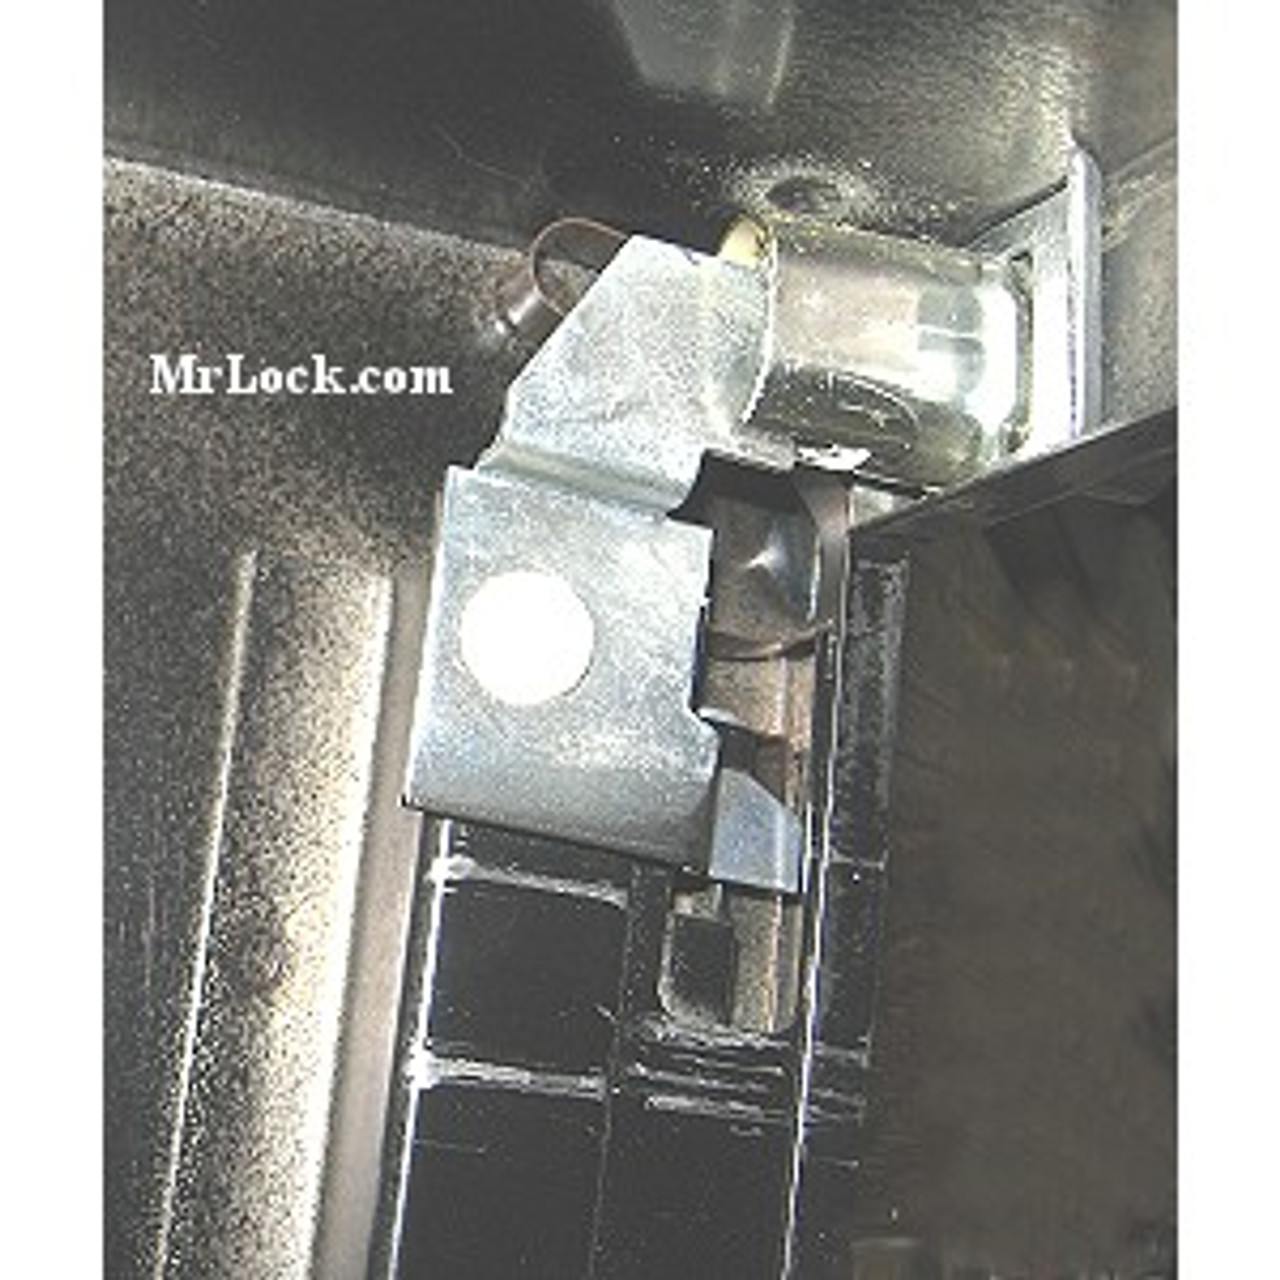 HON F26 REPLACEMENT FILE CABINET LOCK (KEYED DIFFERENT)